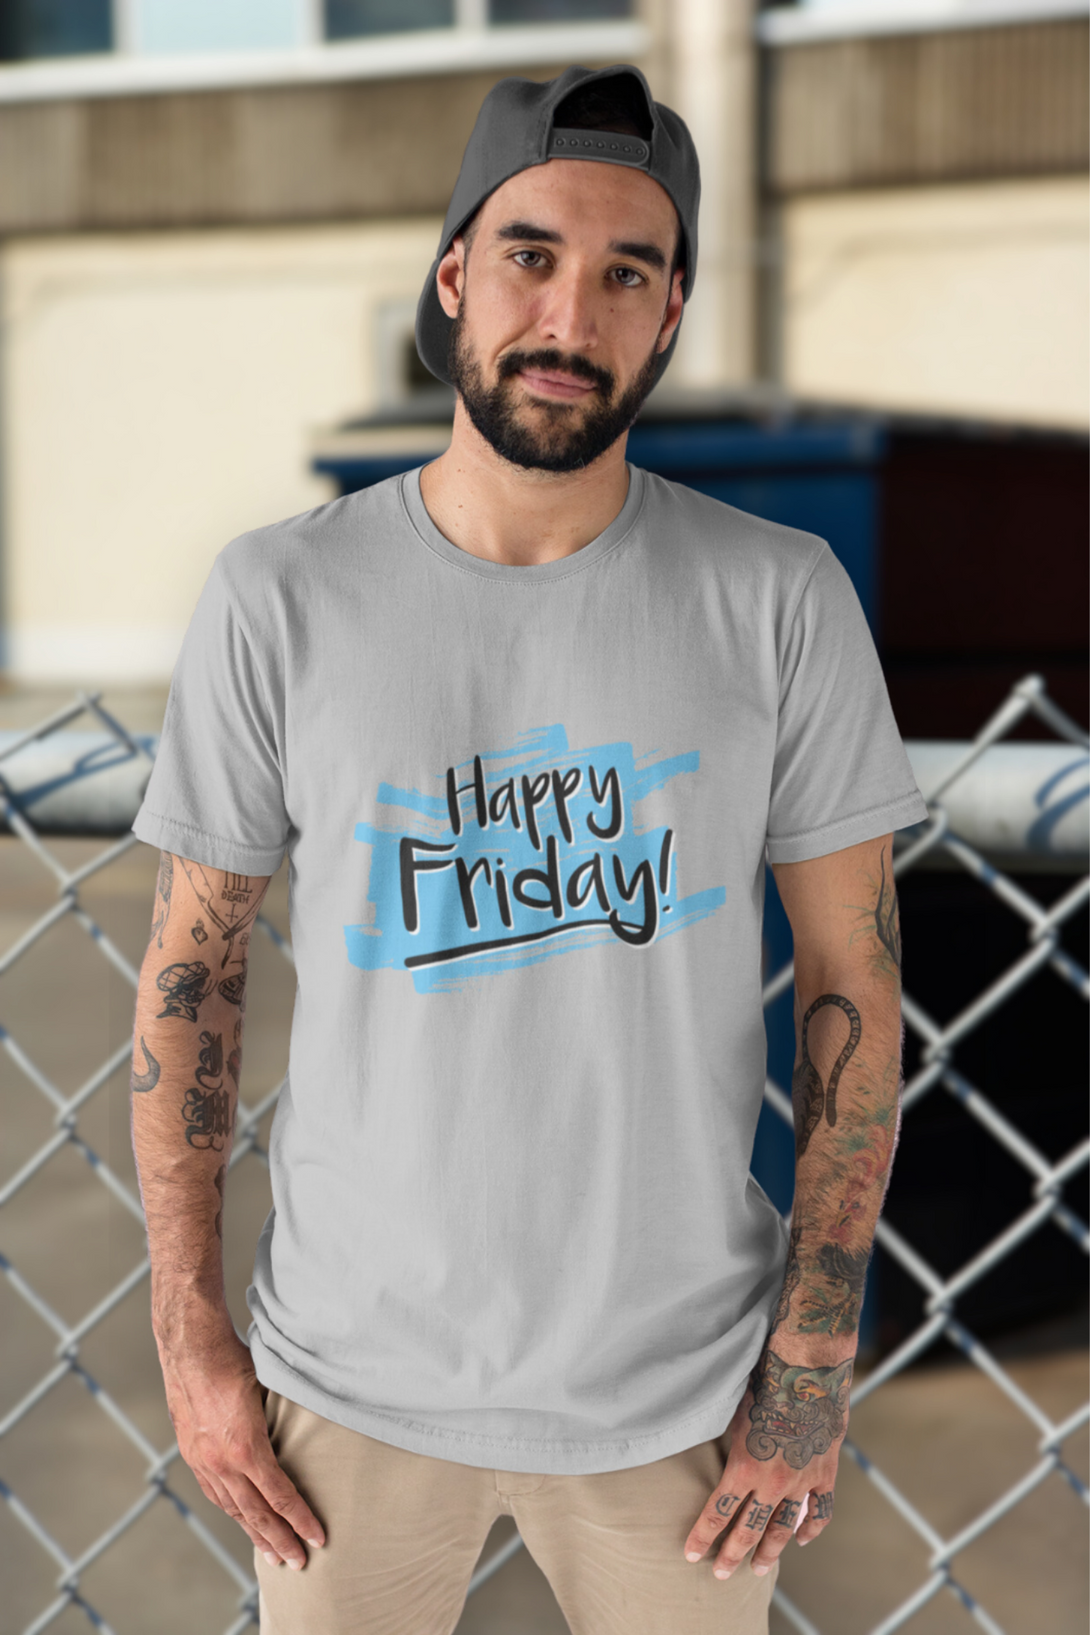 Happy Friday Printed T-Shirt For Men - WowWaves - 4